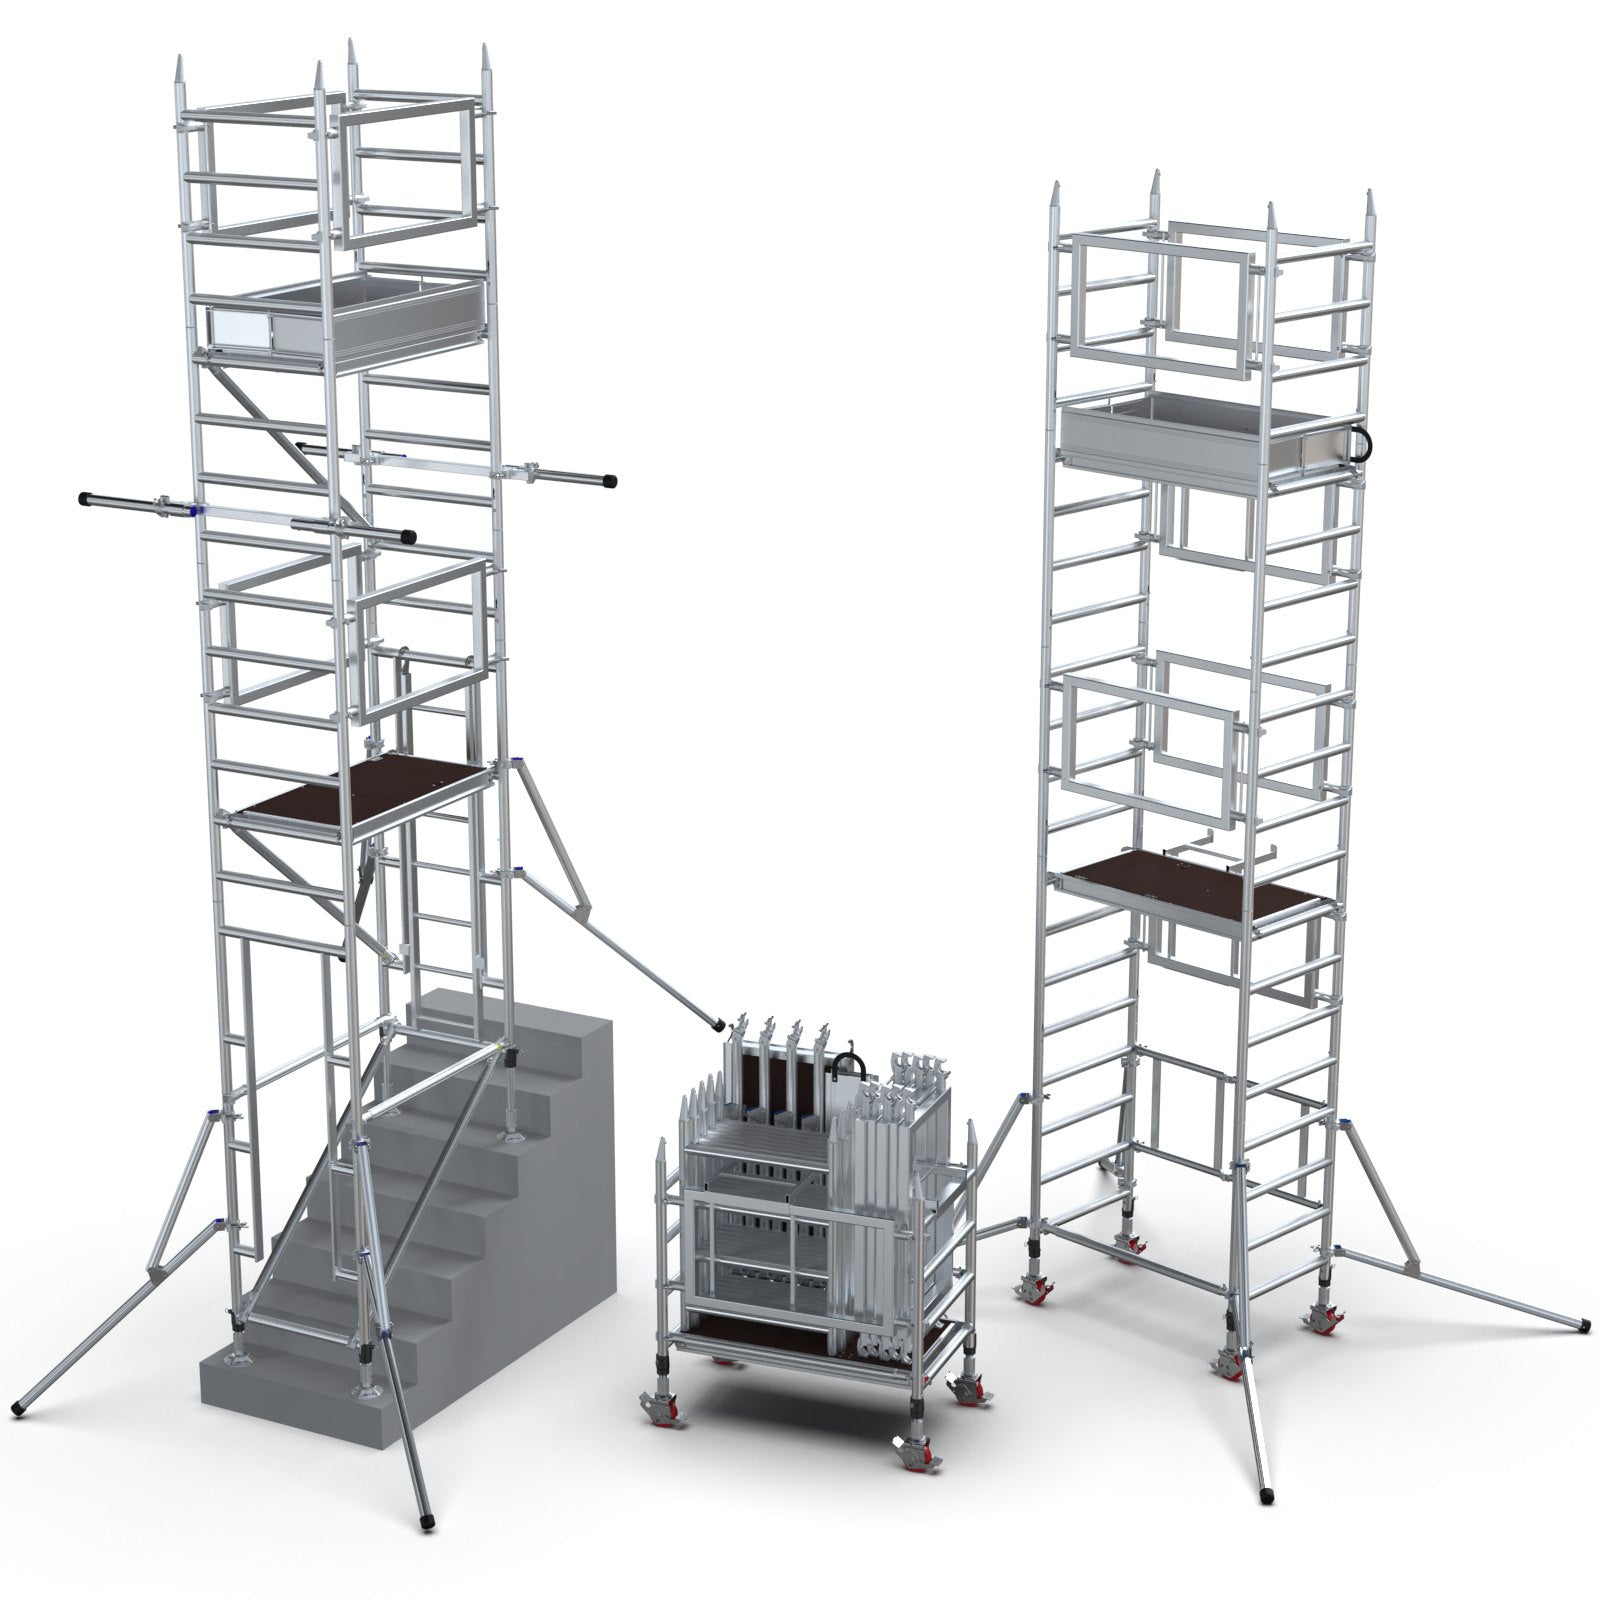 An Alto stairwell Pro Tower, an Alto mini Tower and a Mini Tower inside its trolley.